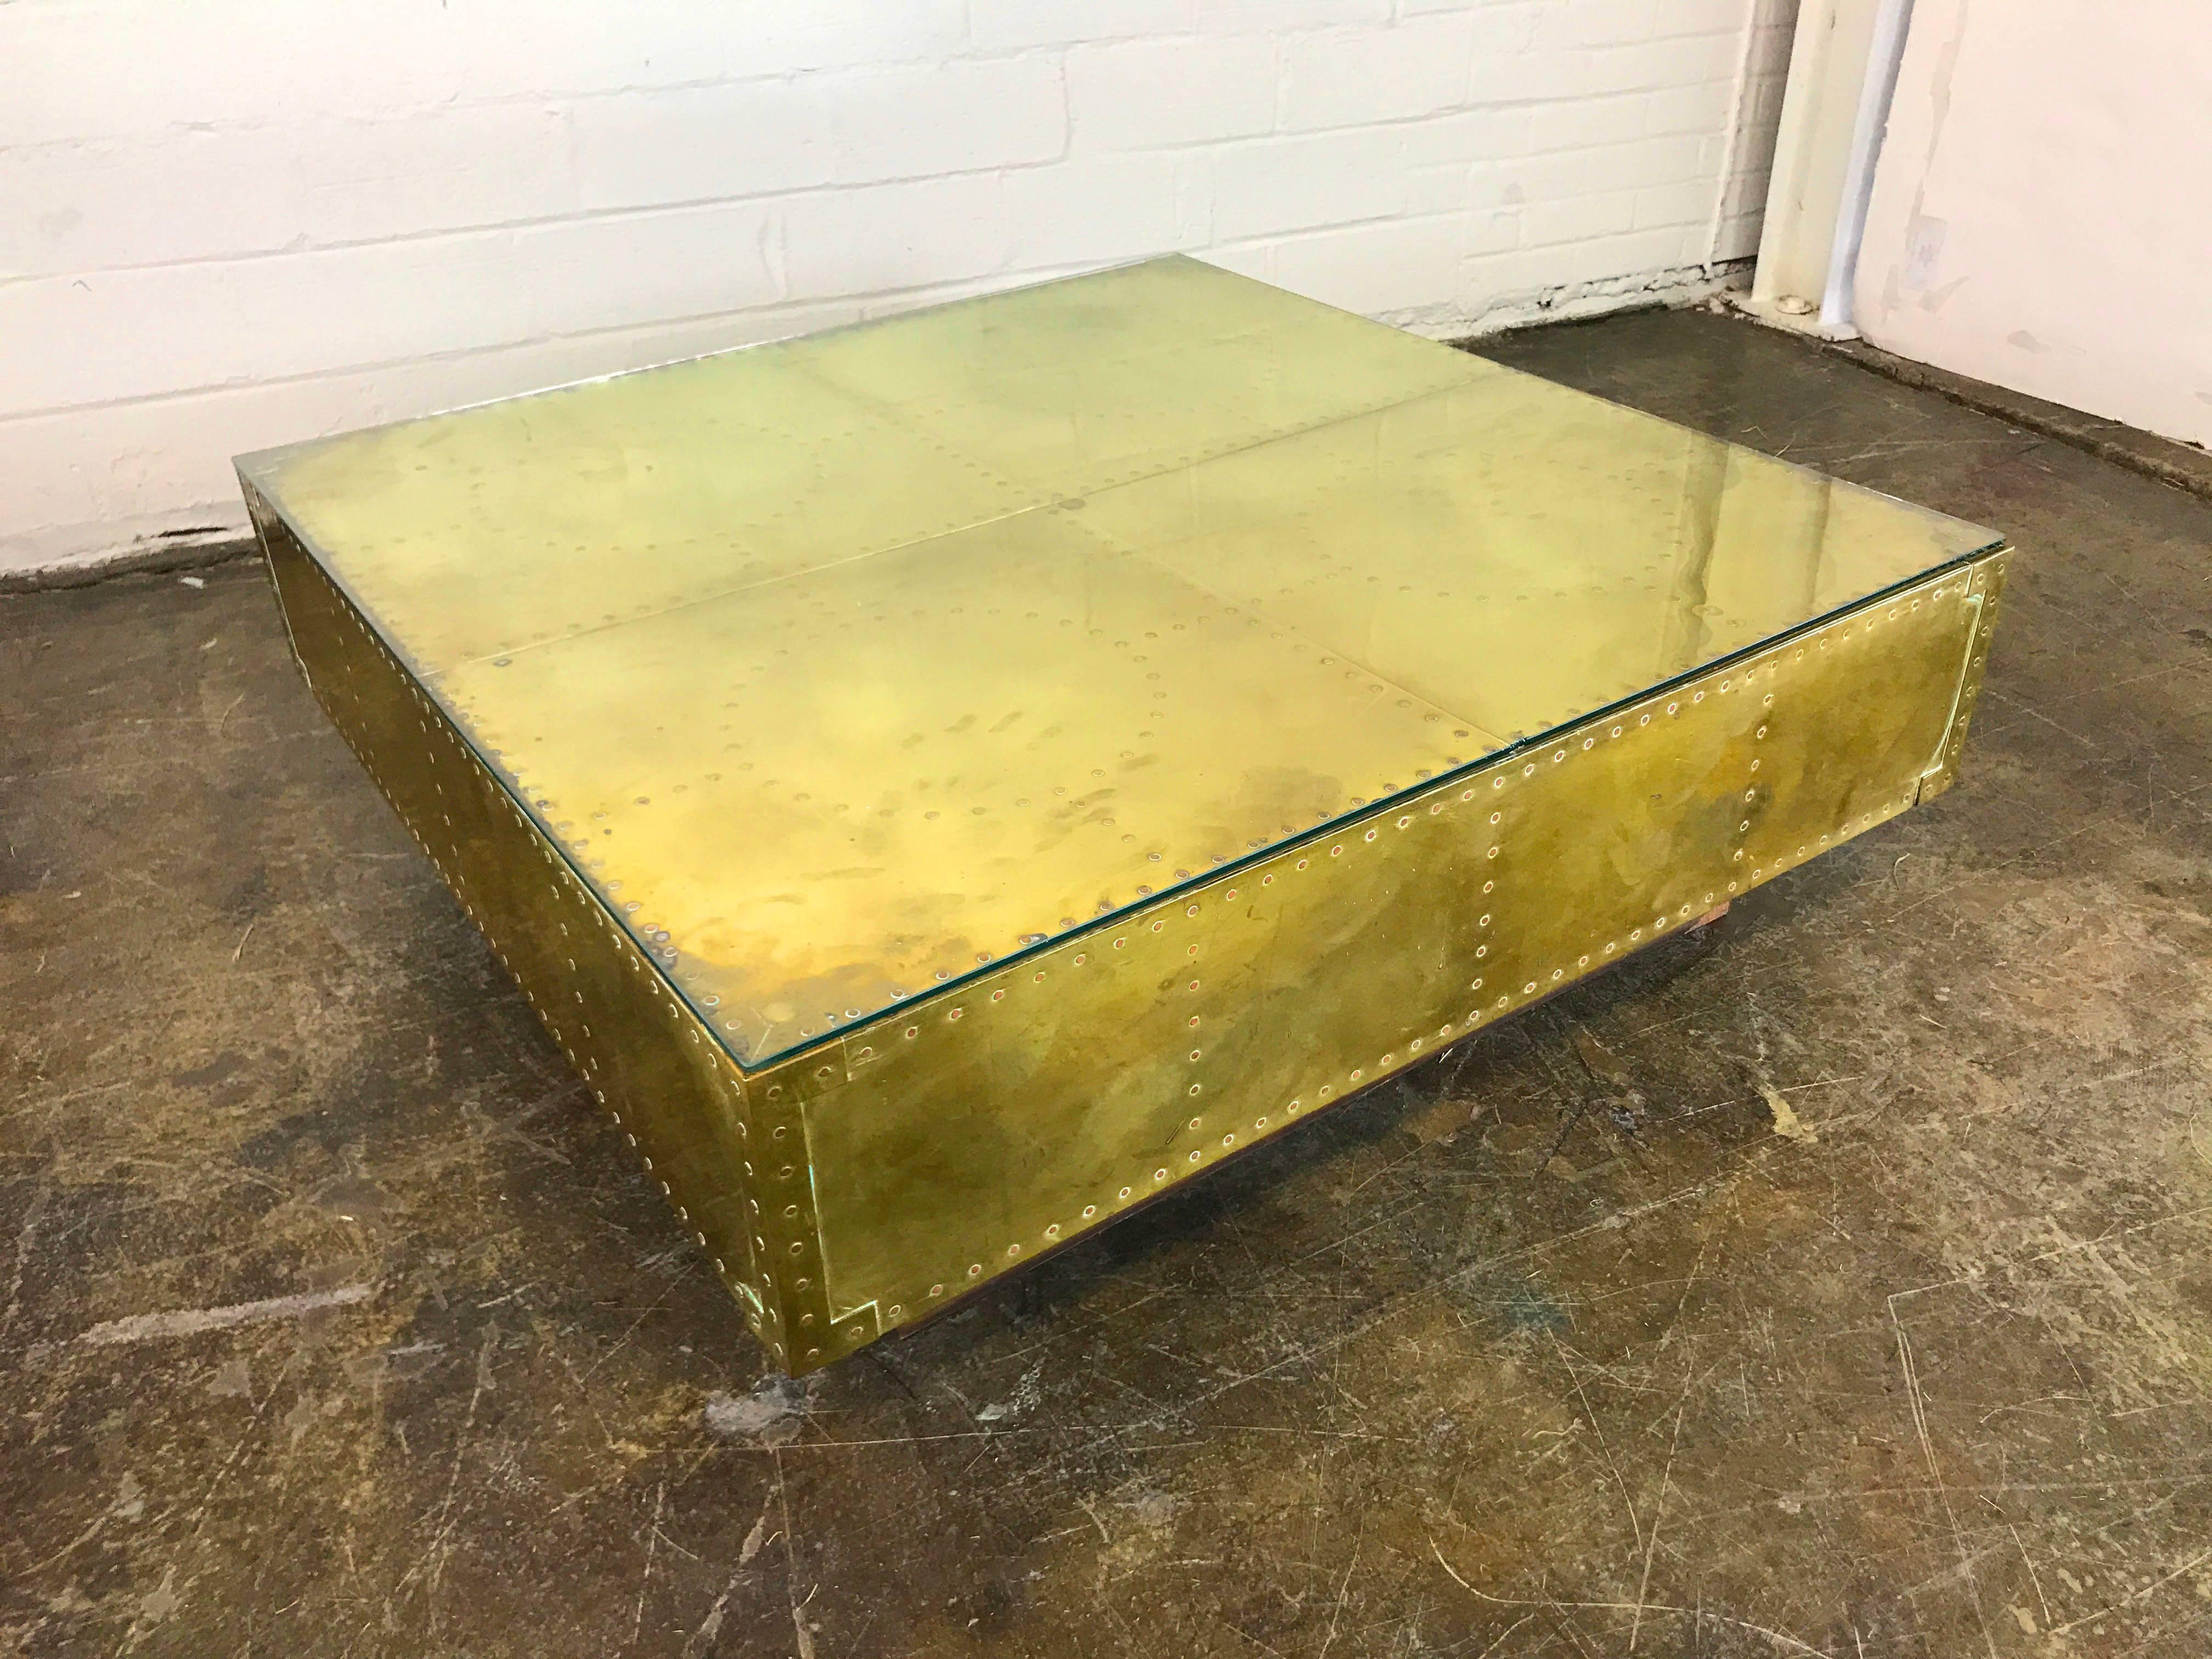 Sarreid brass coffee table with a warm patina. In good found vintage condition with some oxidation and wear due to age and use. The table does come with a glass top, circa 1970s. 

Dimensions: 40